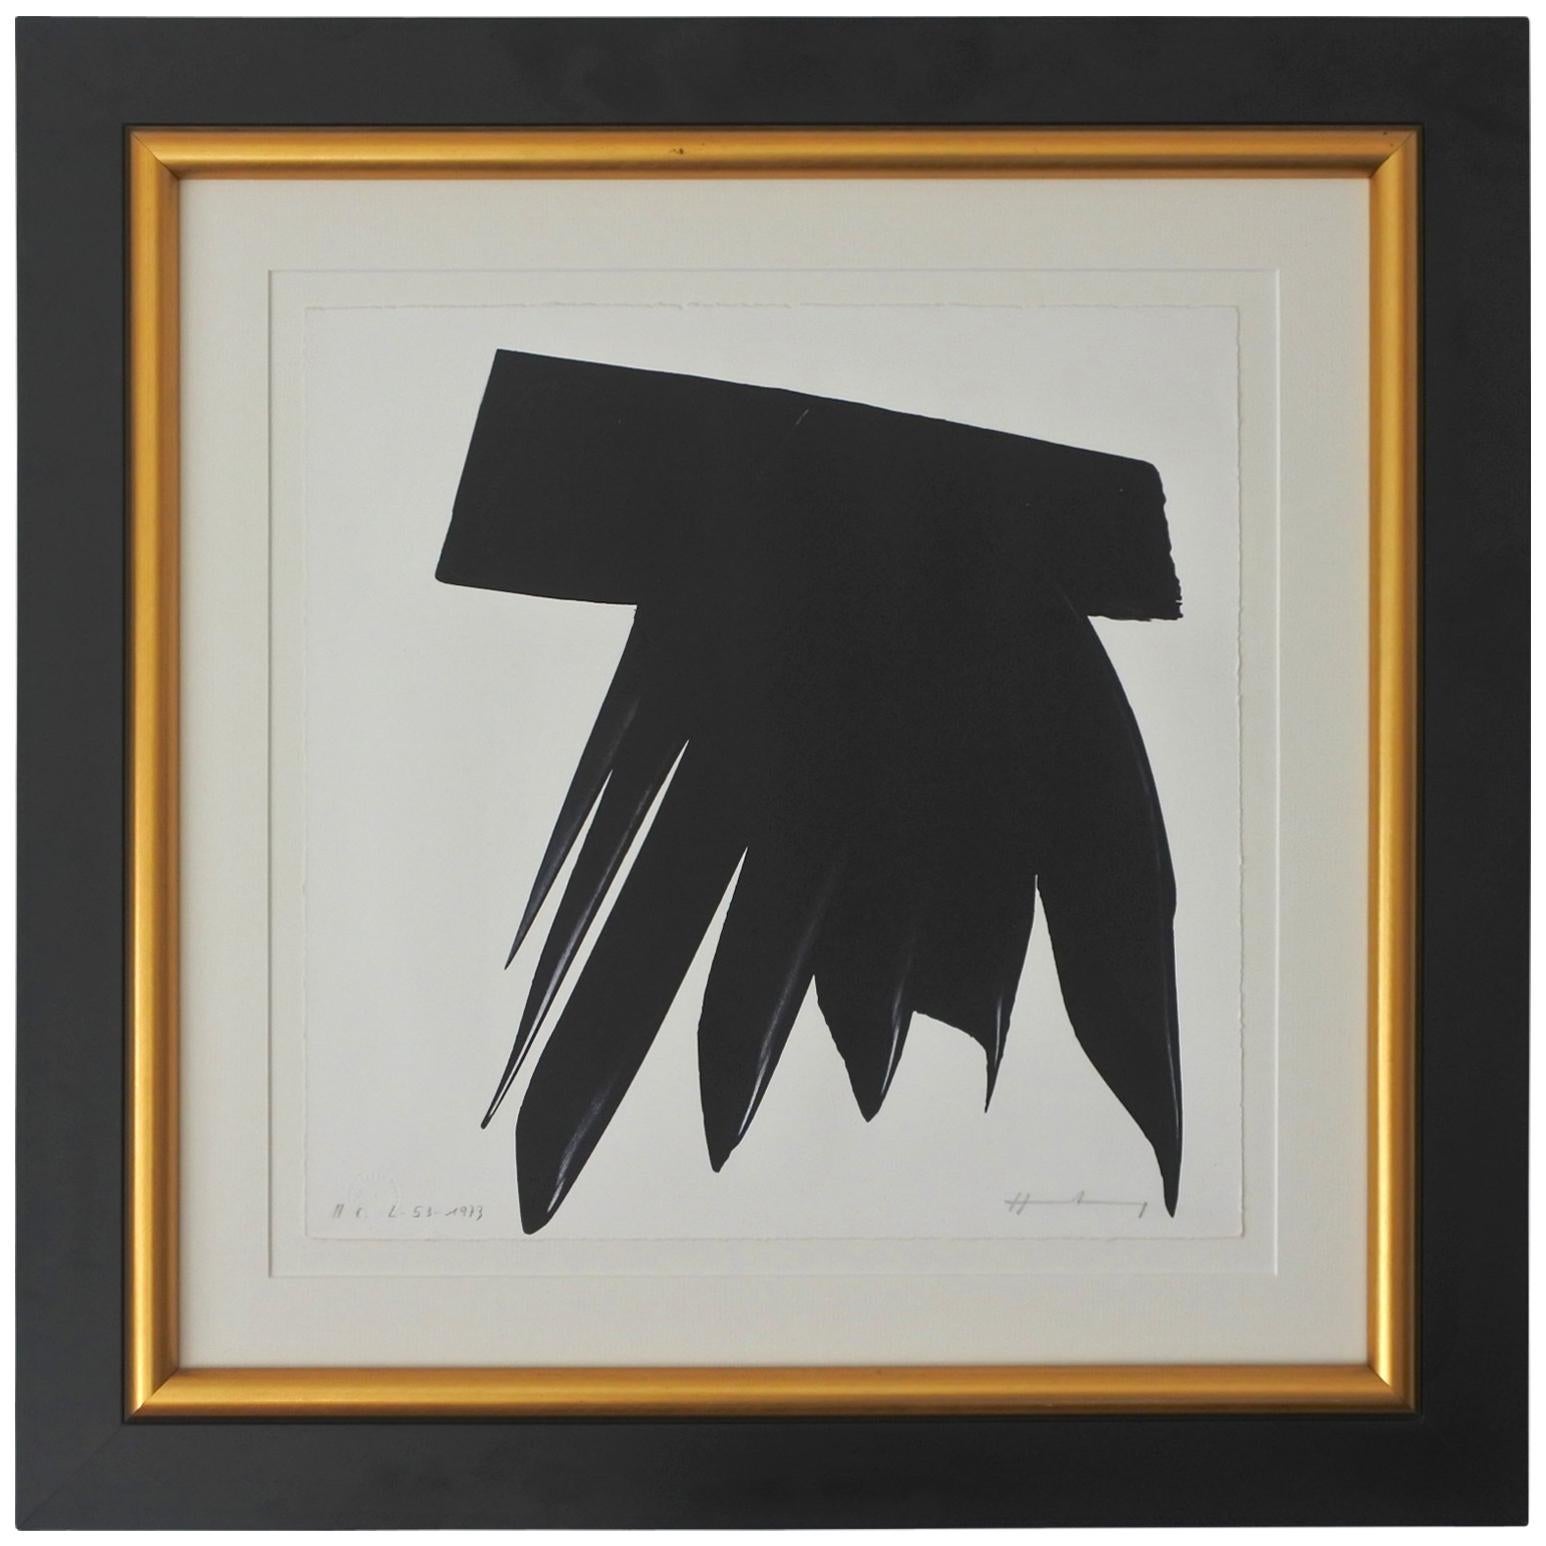 Hans Hartung Framed Abstract Lithograph L-53, Pencil Signed and Dated 1973